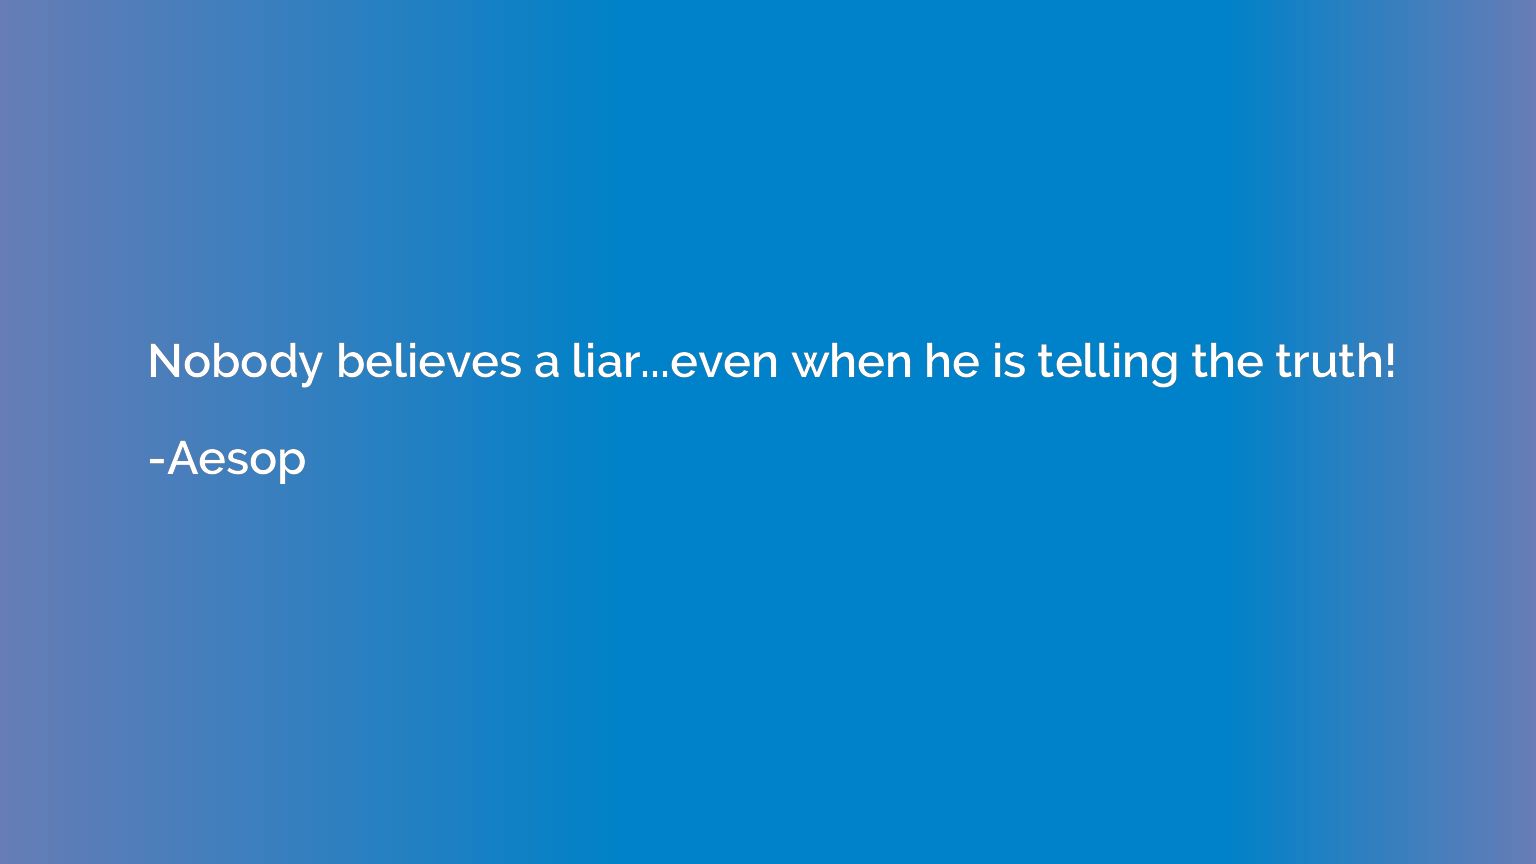 Nobody believes a liar...even when he is telling the truth!